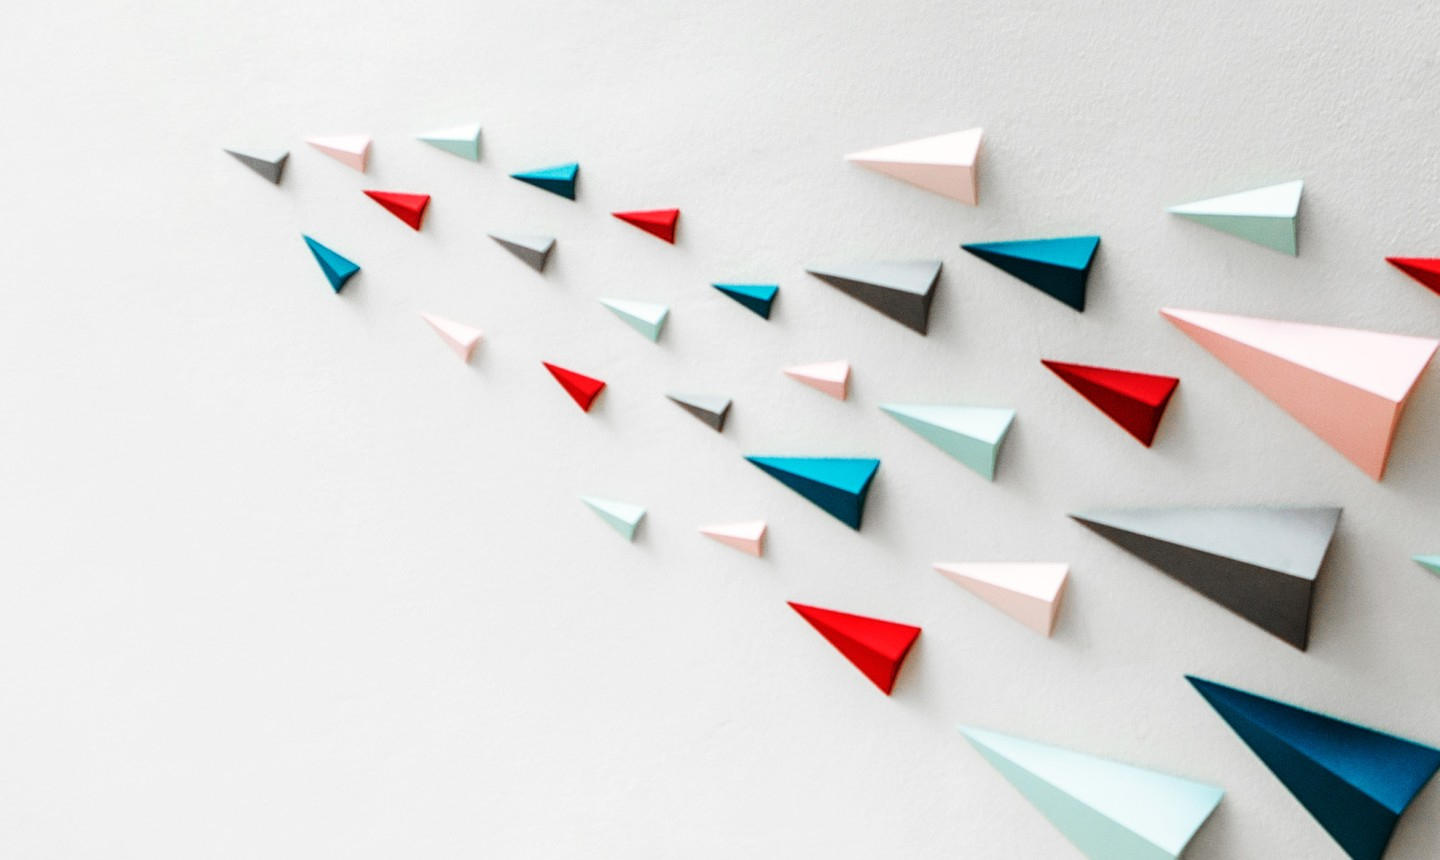 Paper Origami Designs Transform Your Boring Walls With The Magic Of Origami